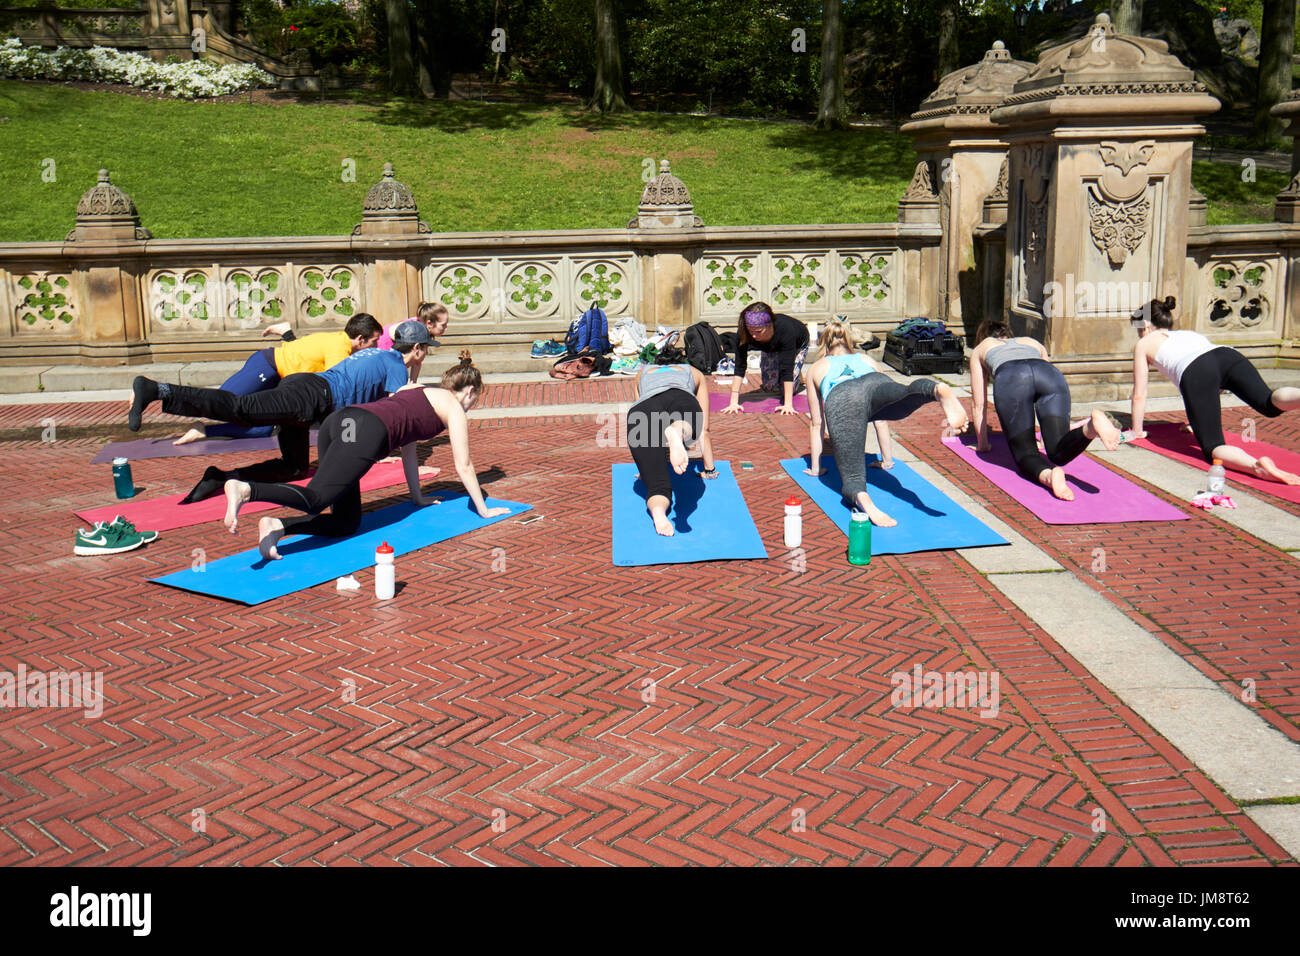 people practising yoga outdoors in Bethesda terrace central park New York City USA Stock Photo